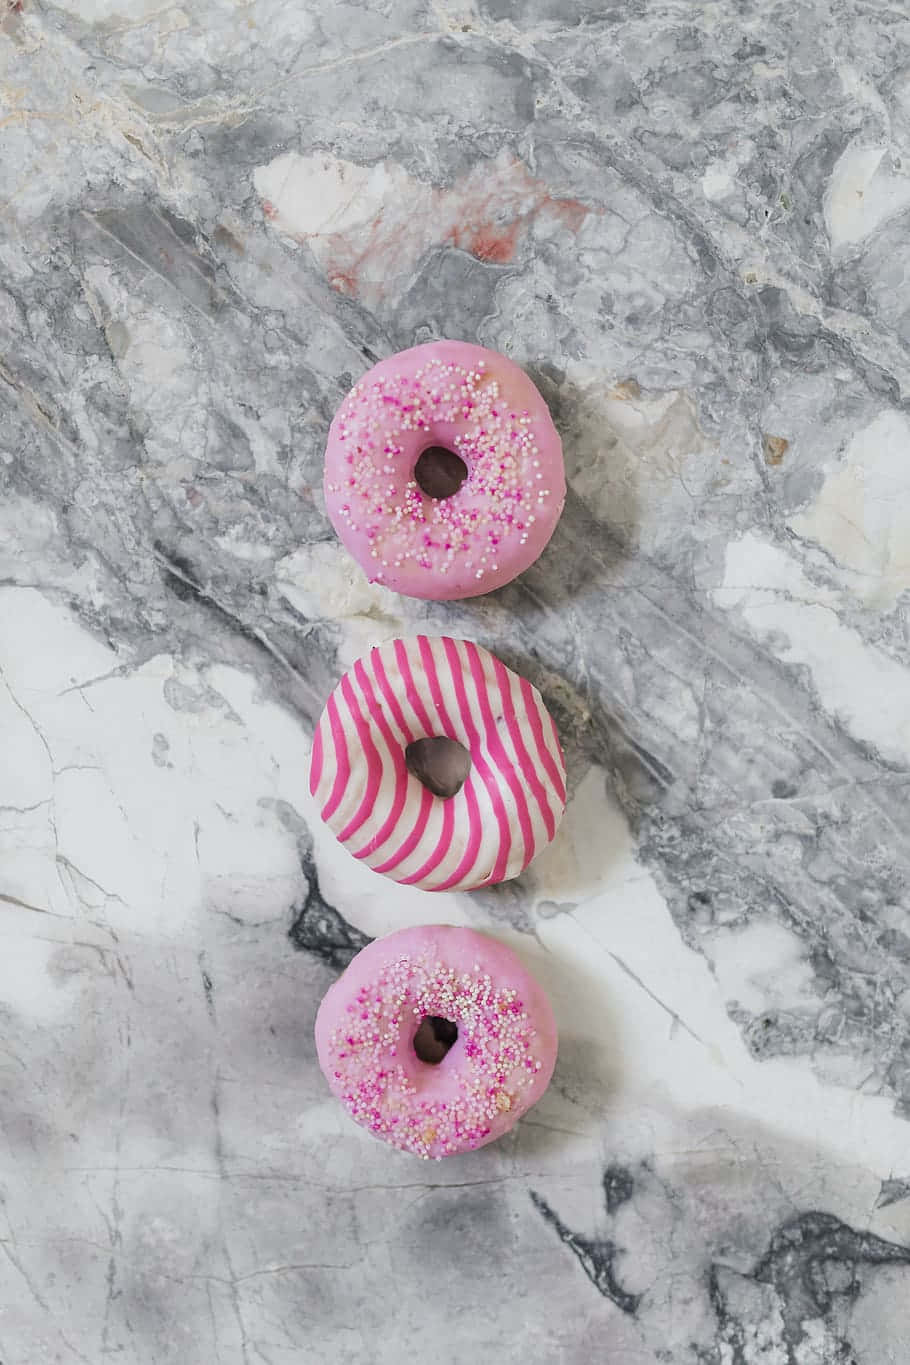 Irresistibly Adorable Donut with Colorful Sprinkles Wallpaper